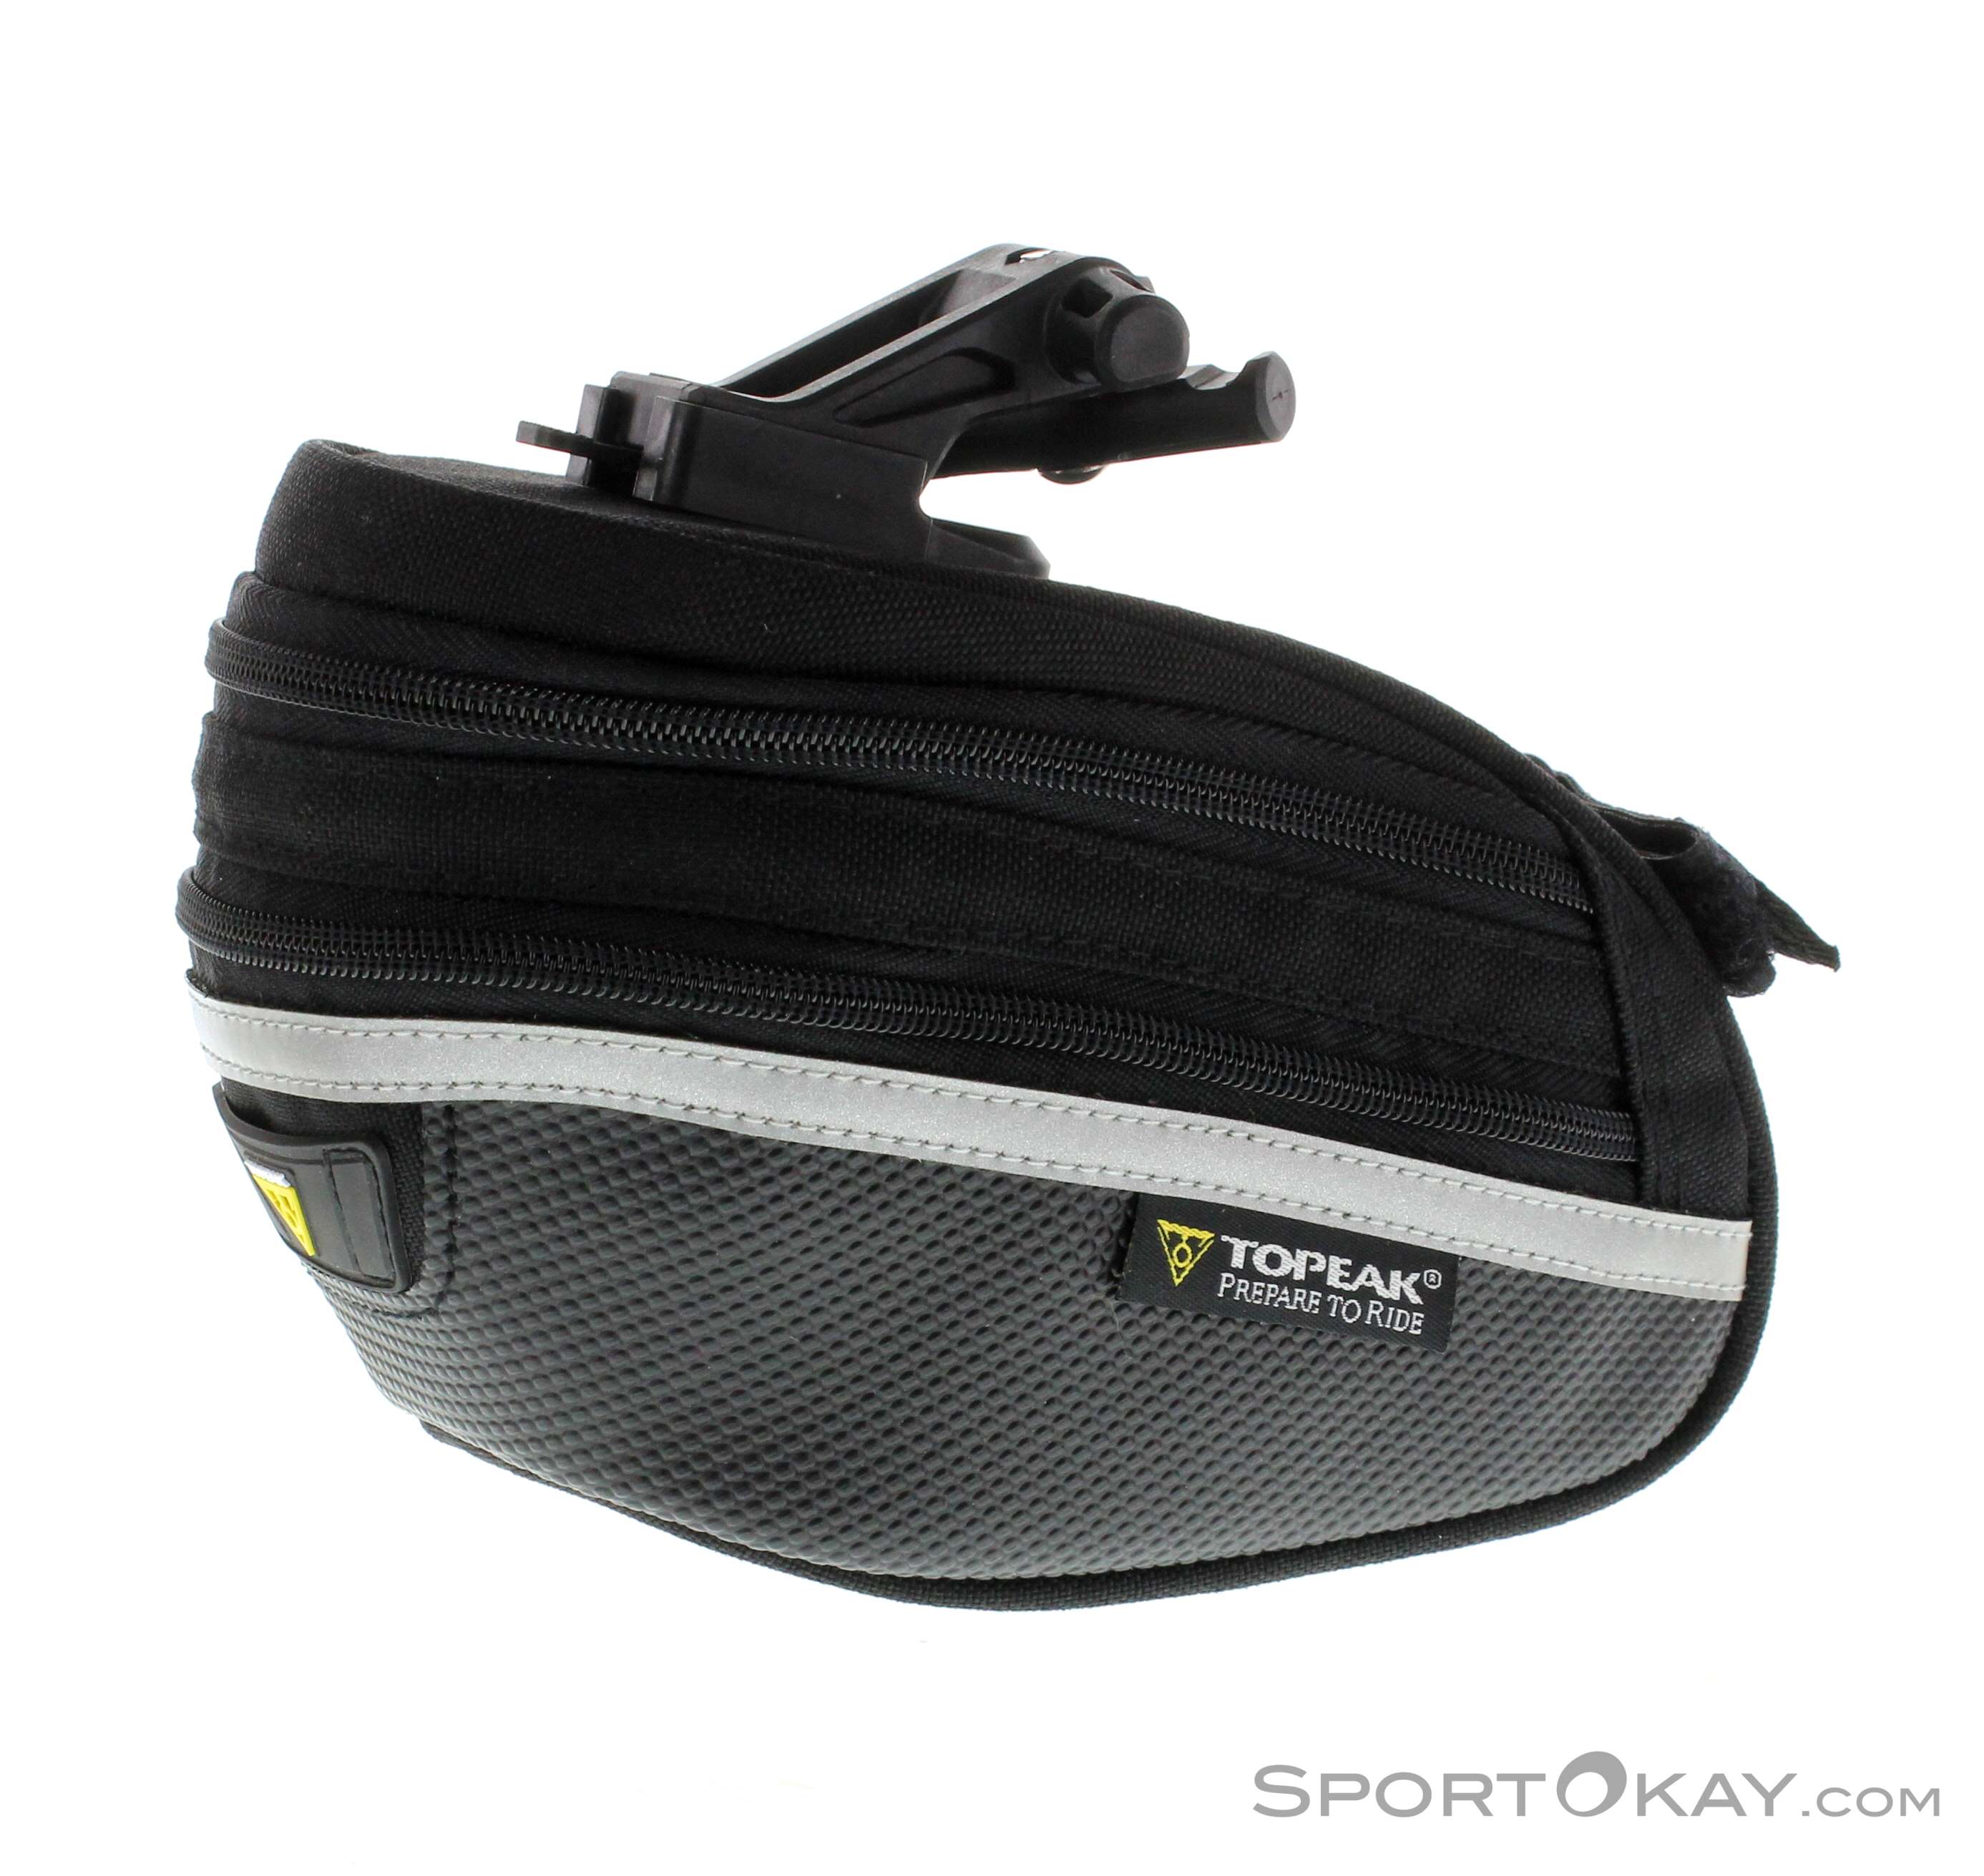 Expands for More Storage Topeak Wedge II Quick Clip Saddle Bag Large